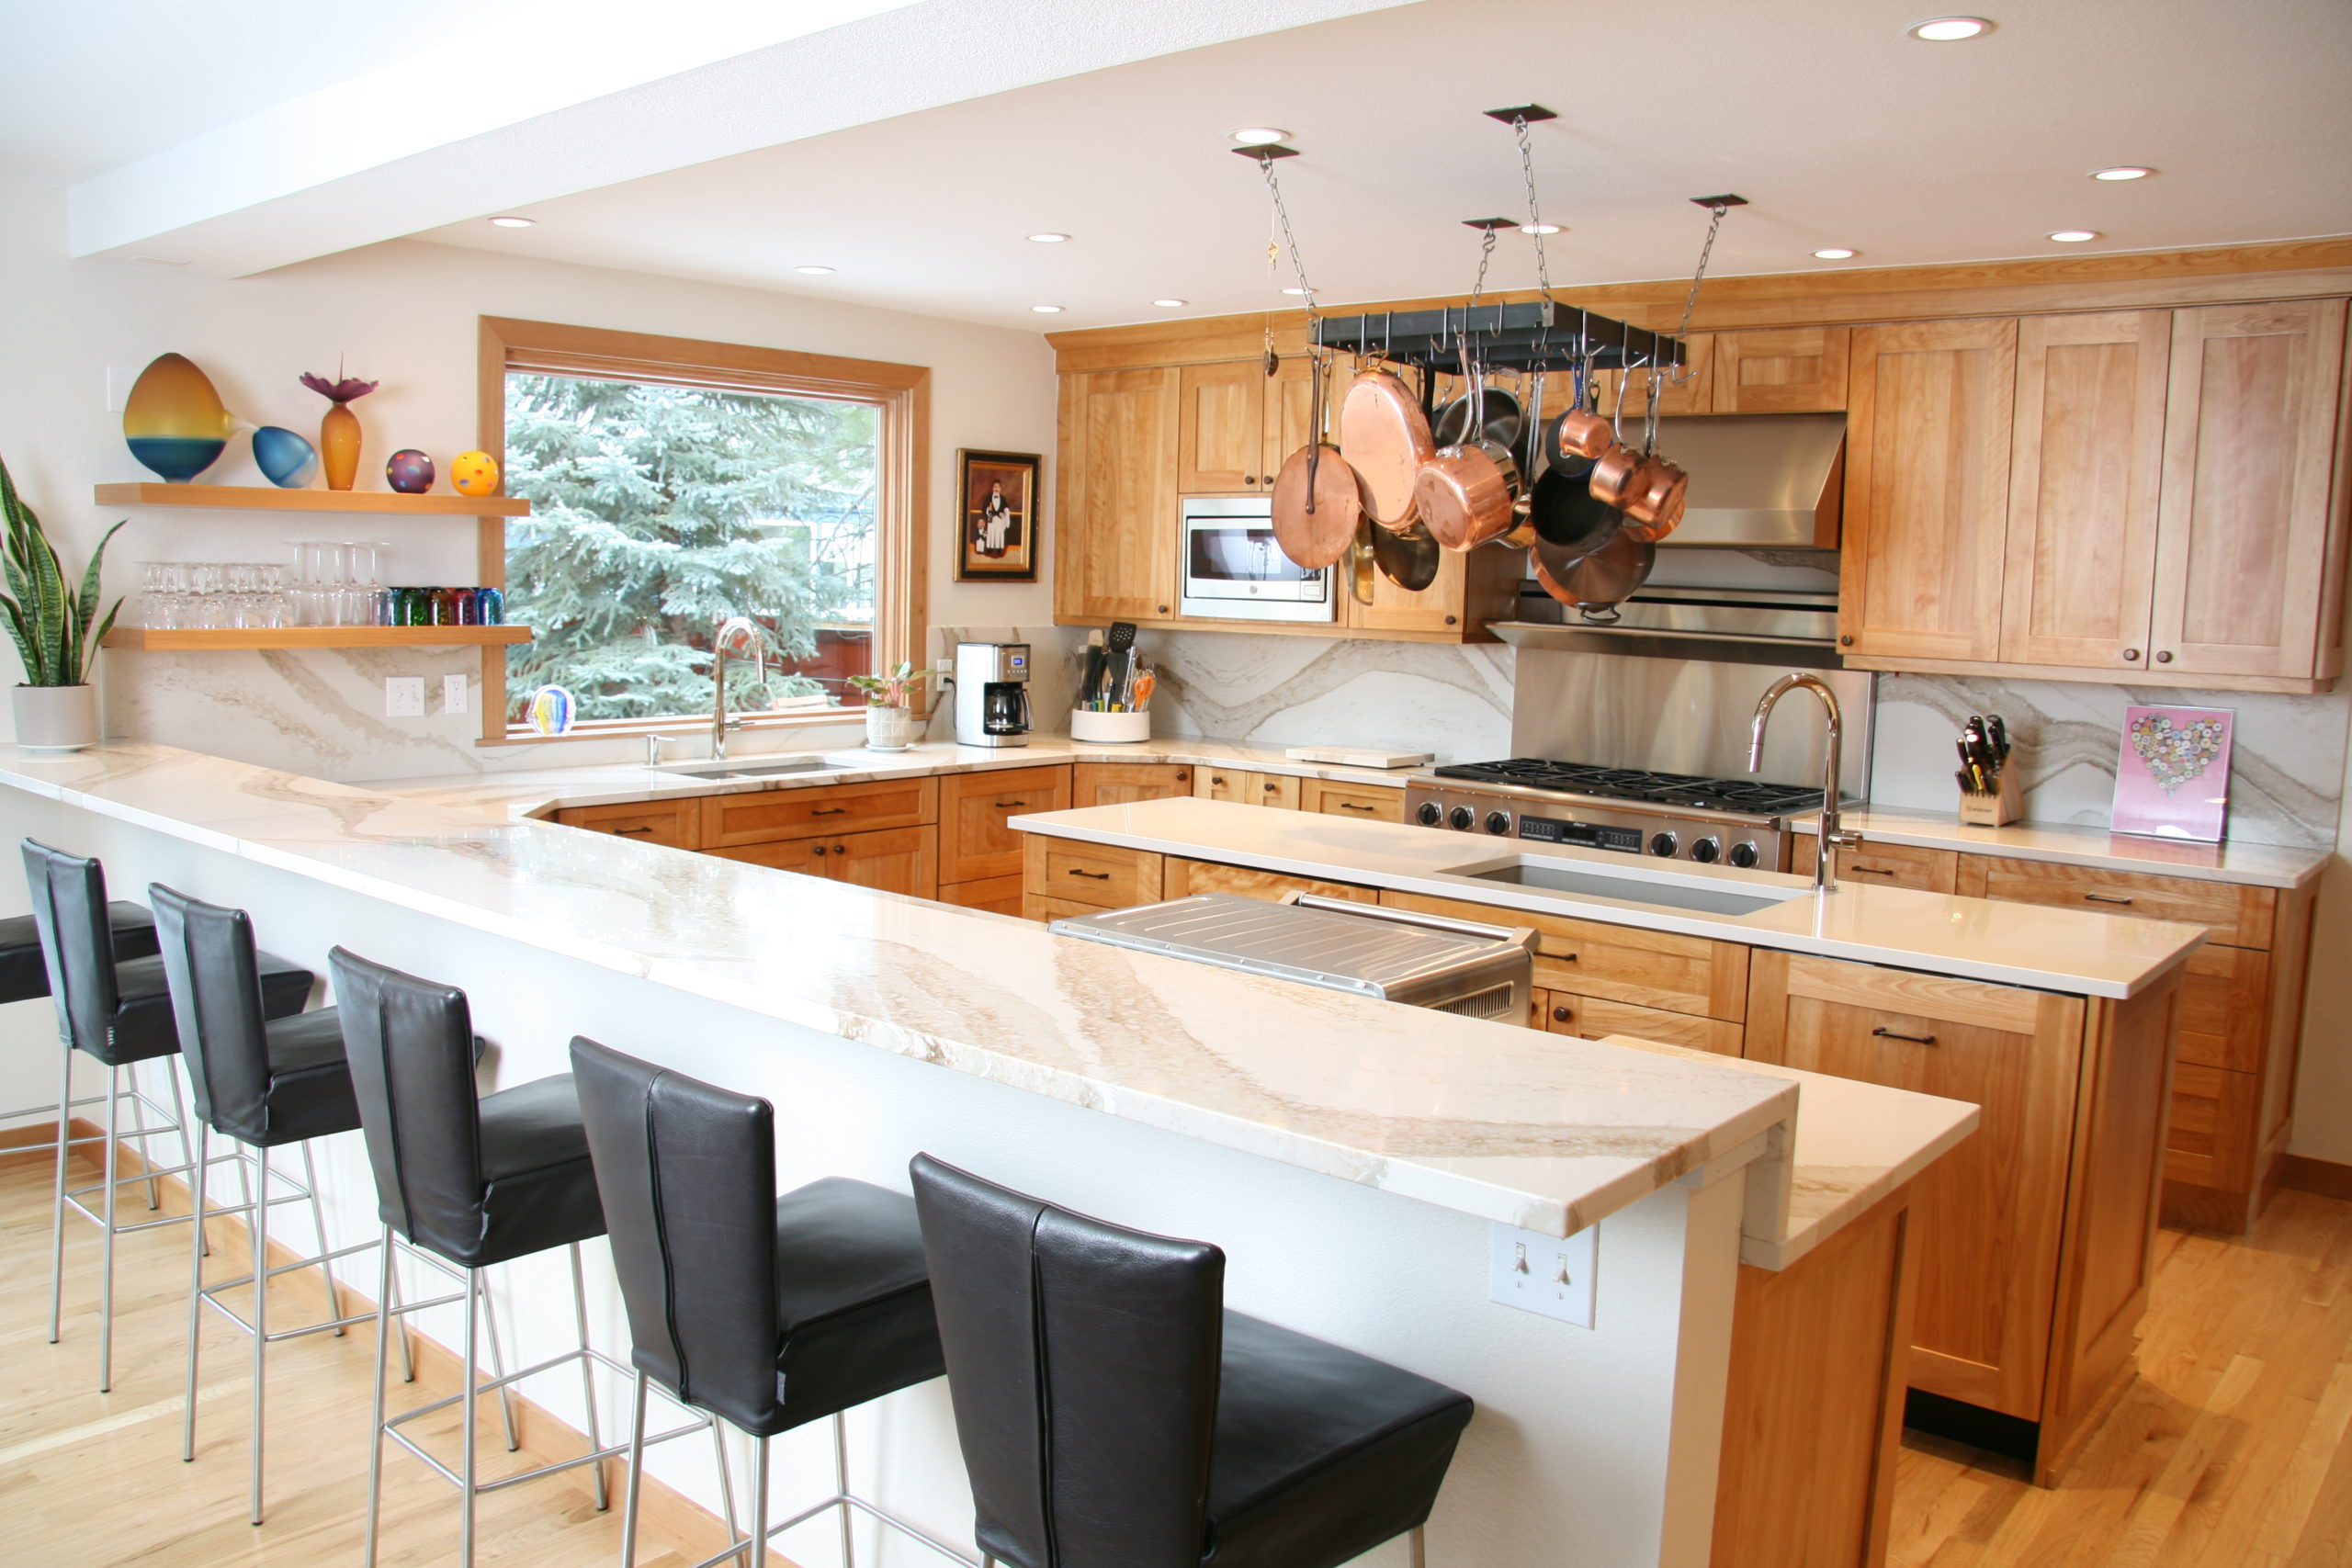 New kitchen remodel and designs in Longmont